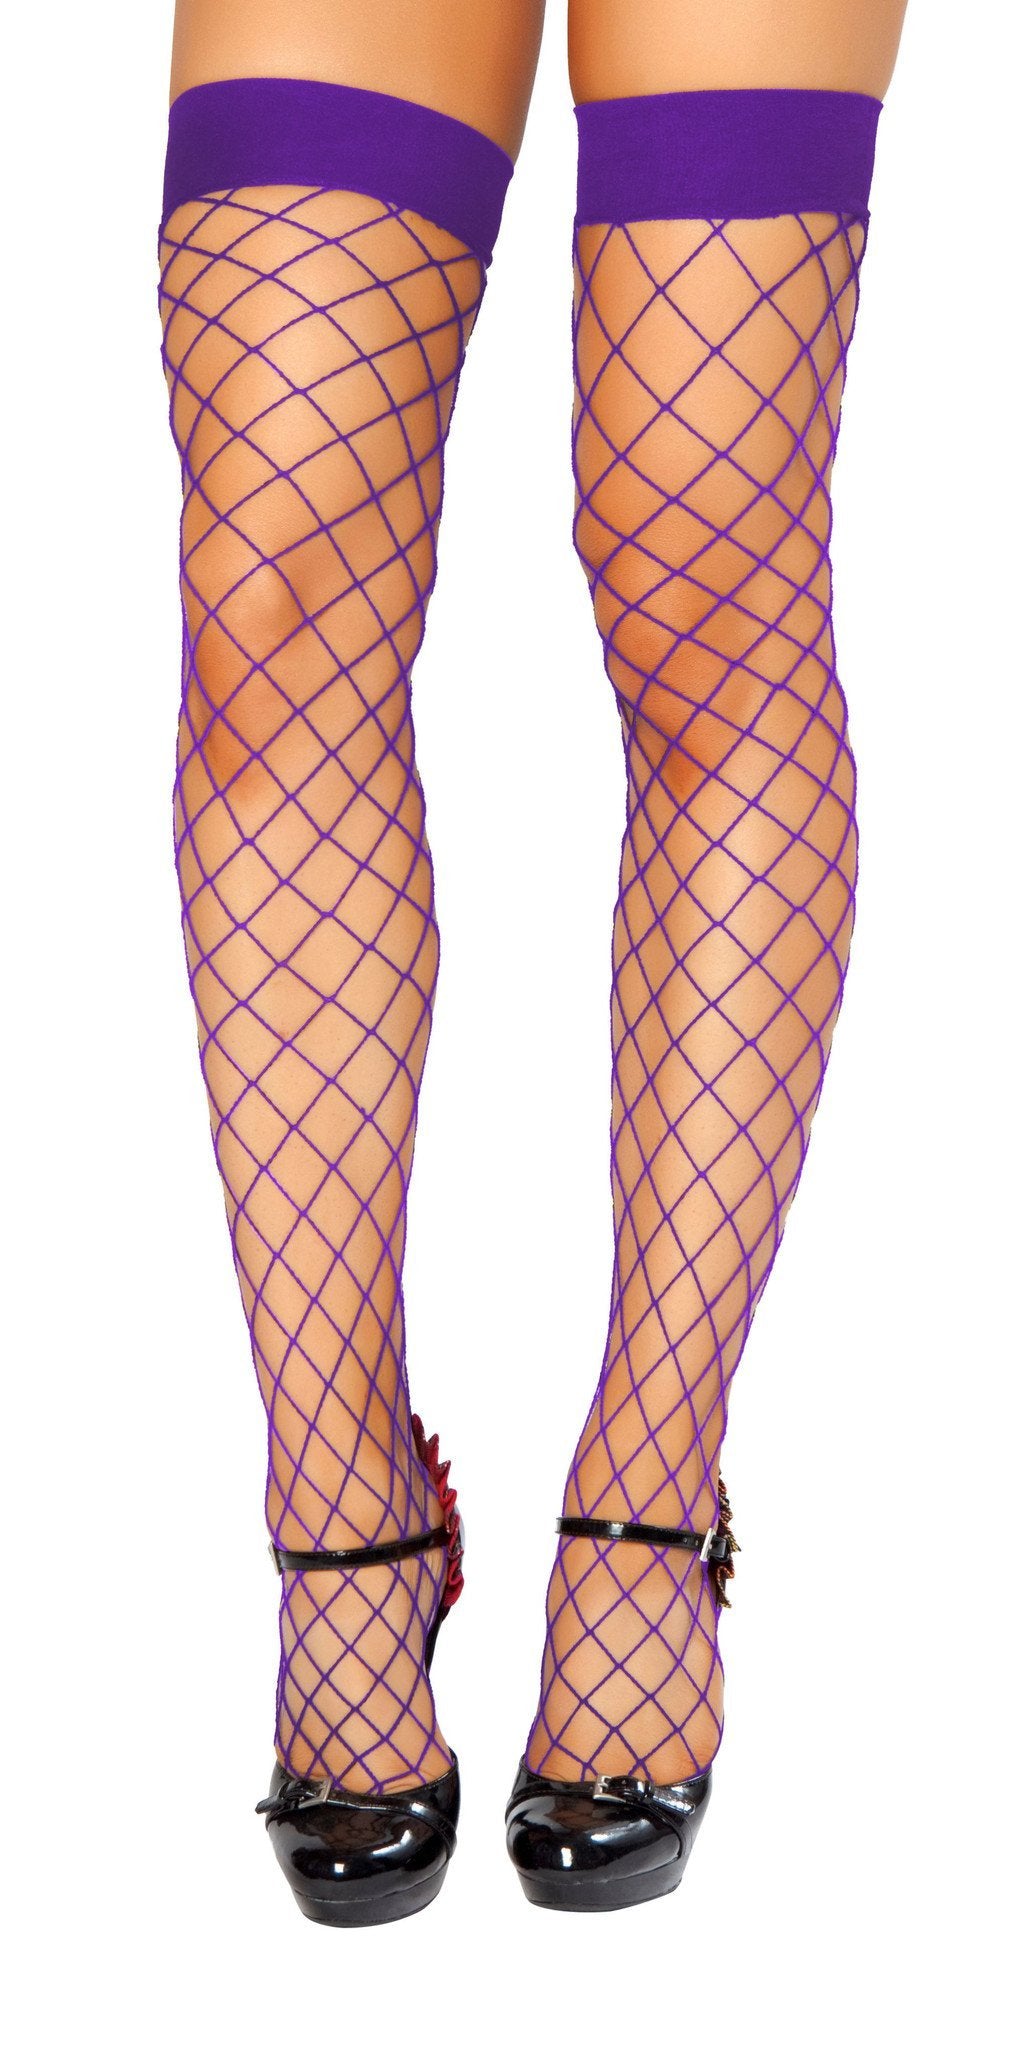 Buy Thigh High Fishnet Stockings from RomaRetailShop for 3.99 with Same Day Shipping Designed by Roma Costume STC207-PP-O/S